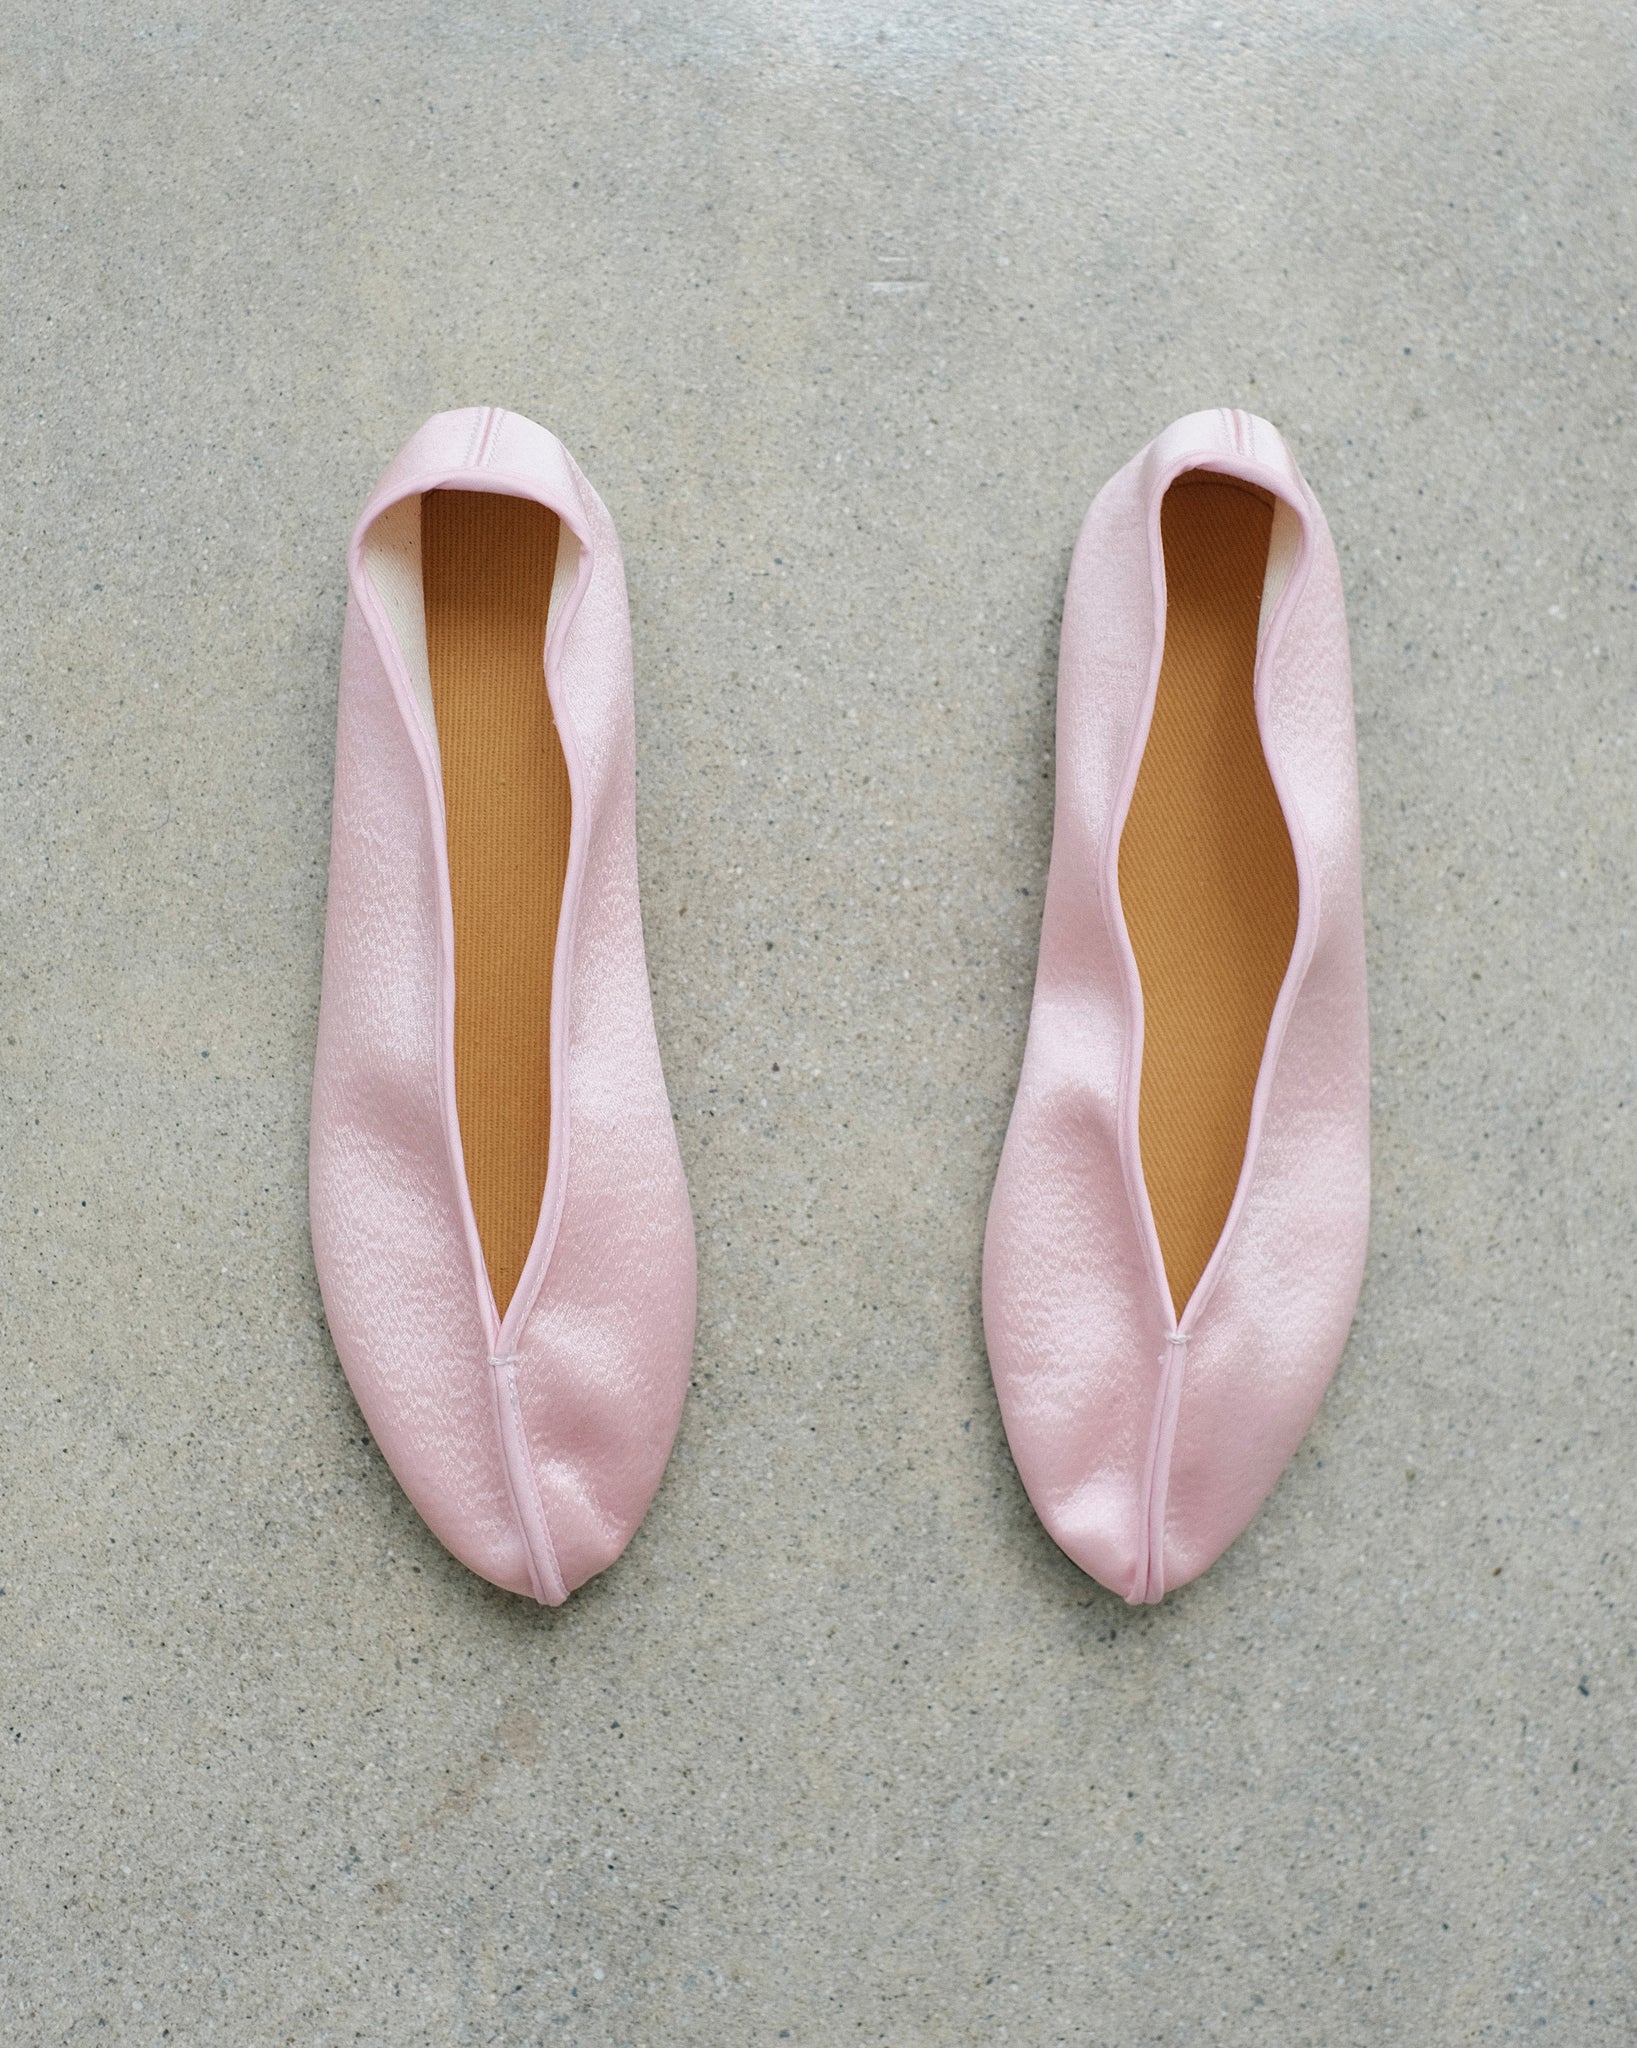 Wax Apple Theater Shoe in Pink Satin